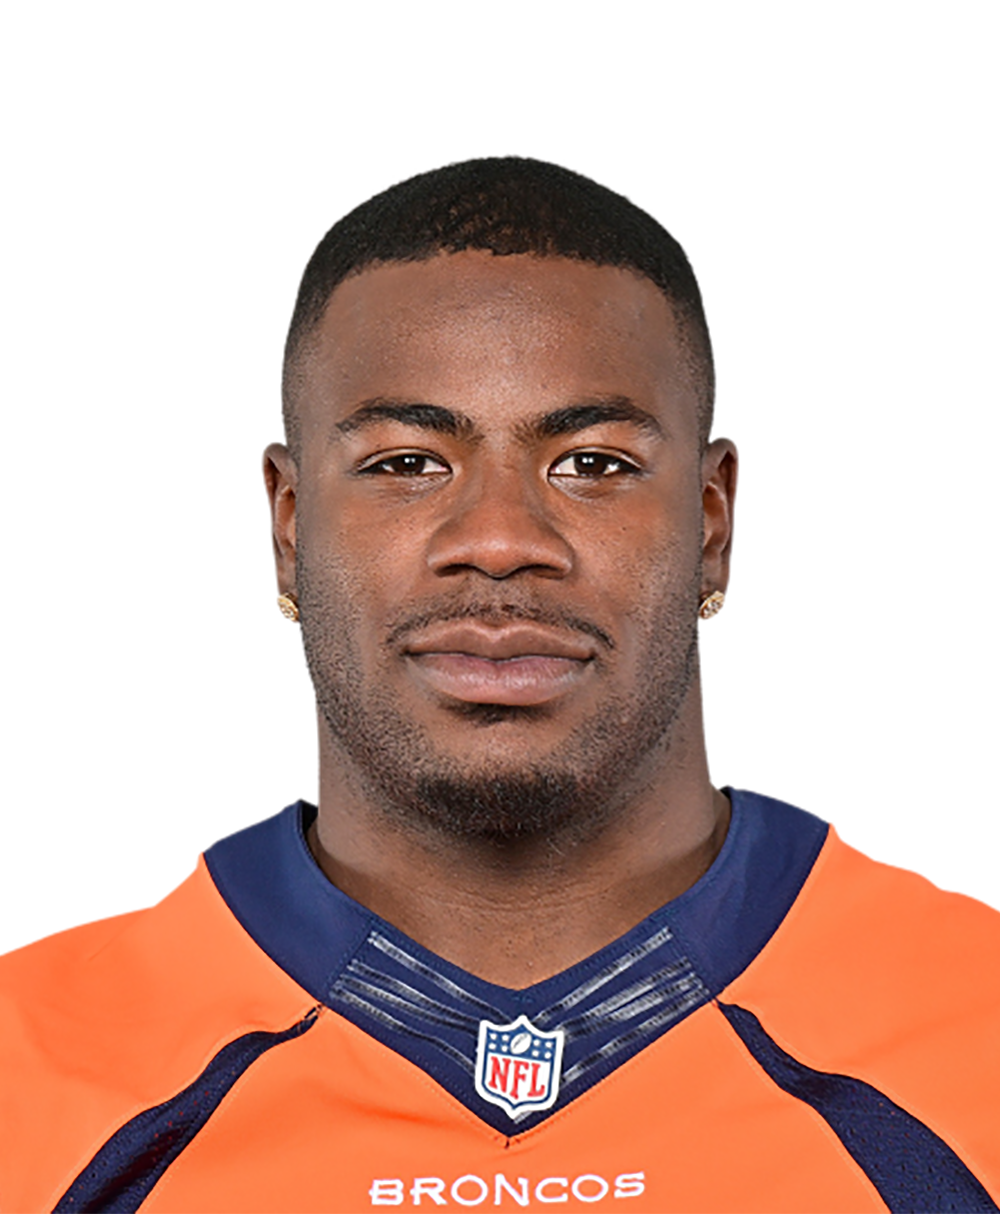 Gordon's butterfingers are getting costly for Denver Broncos - The